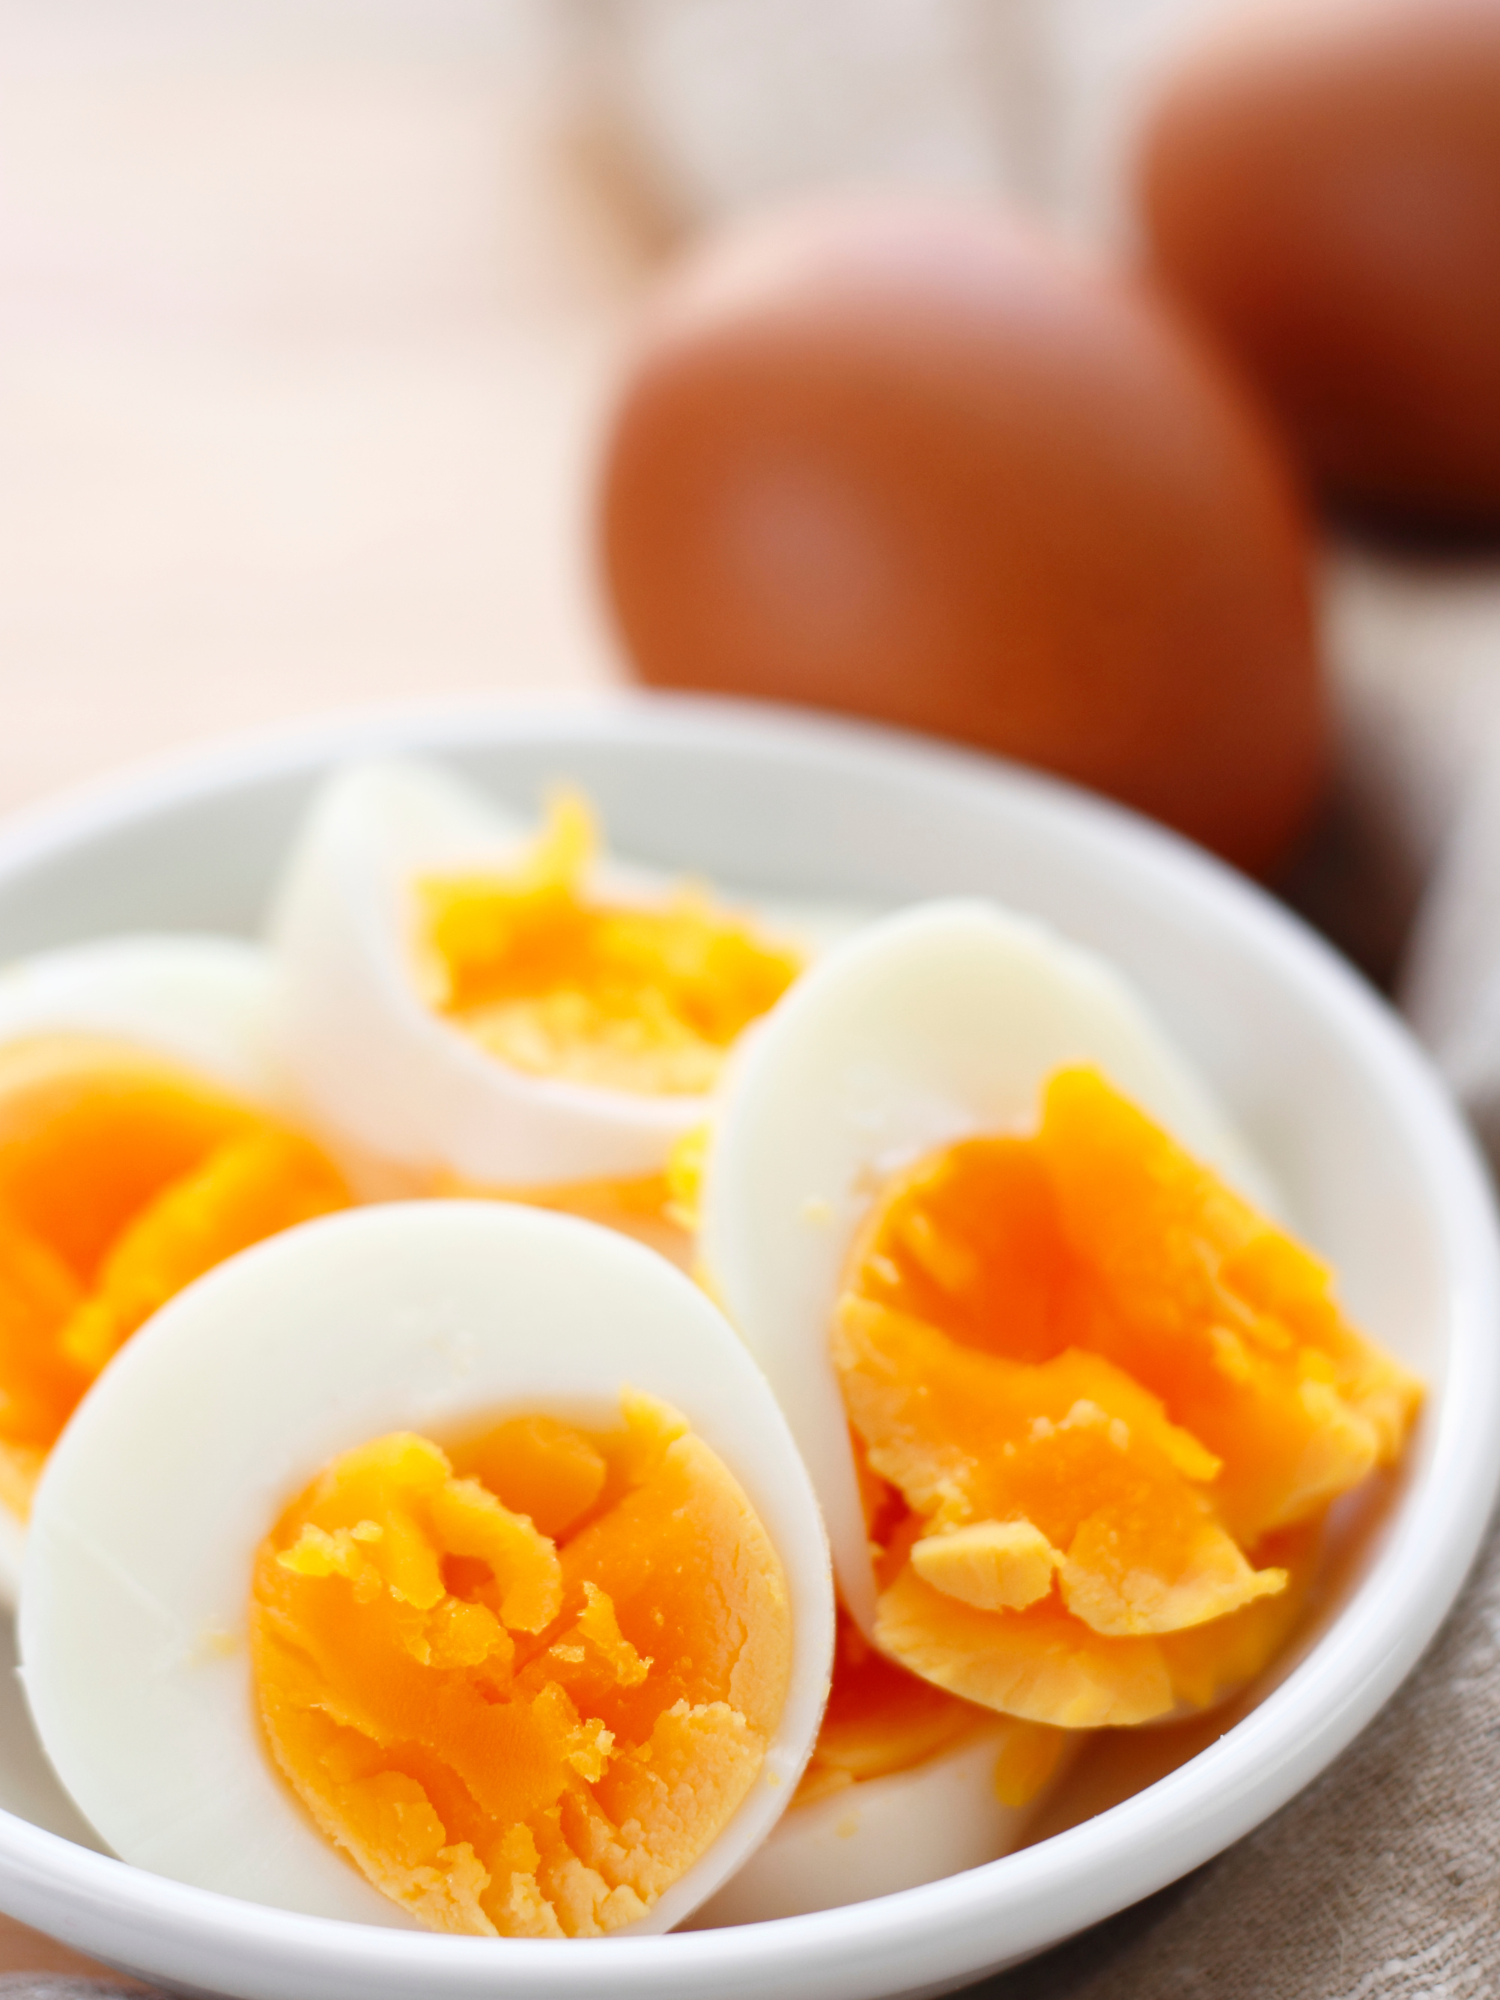 hard boiled eggs cut in half with yellow yolks showing in a white plate with brown hard boiled eggs in the background